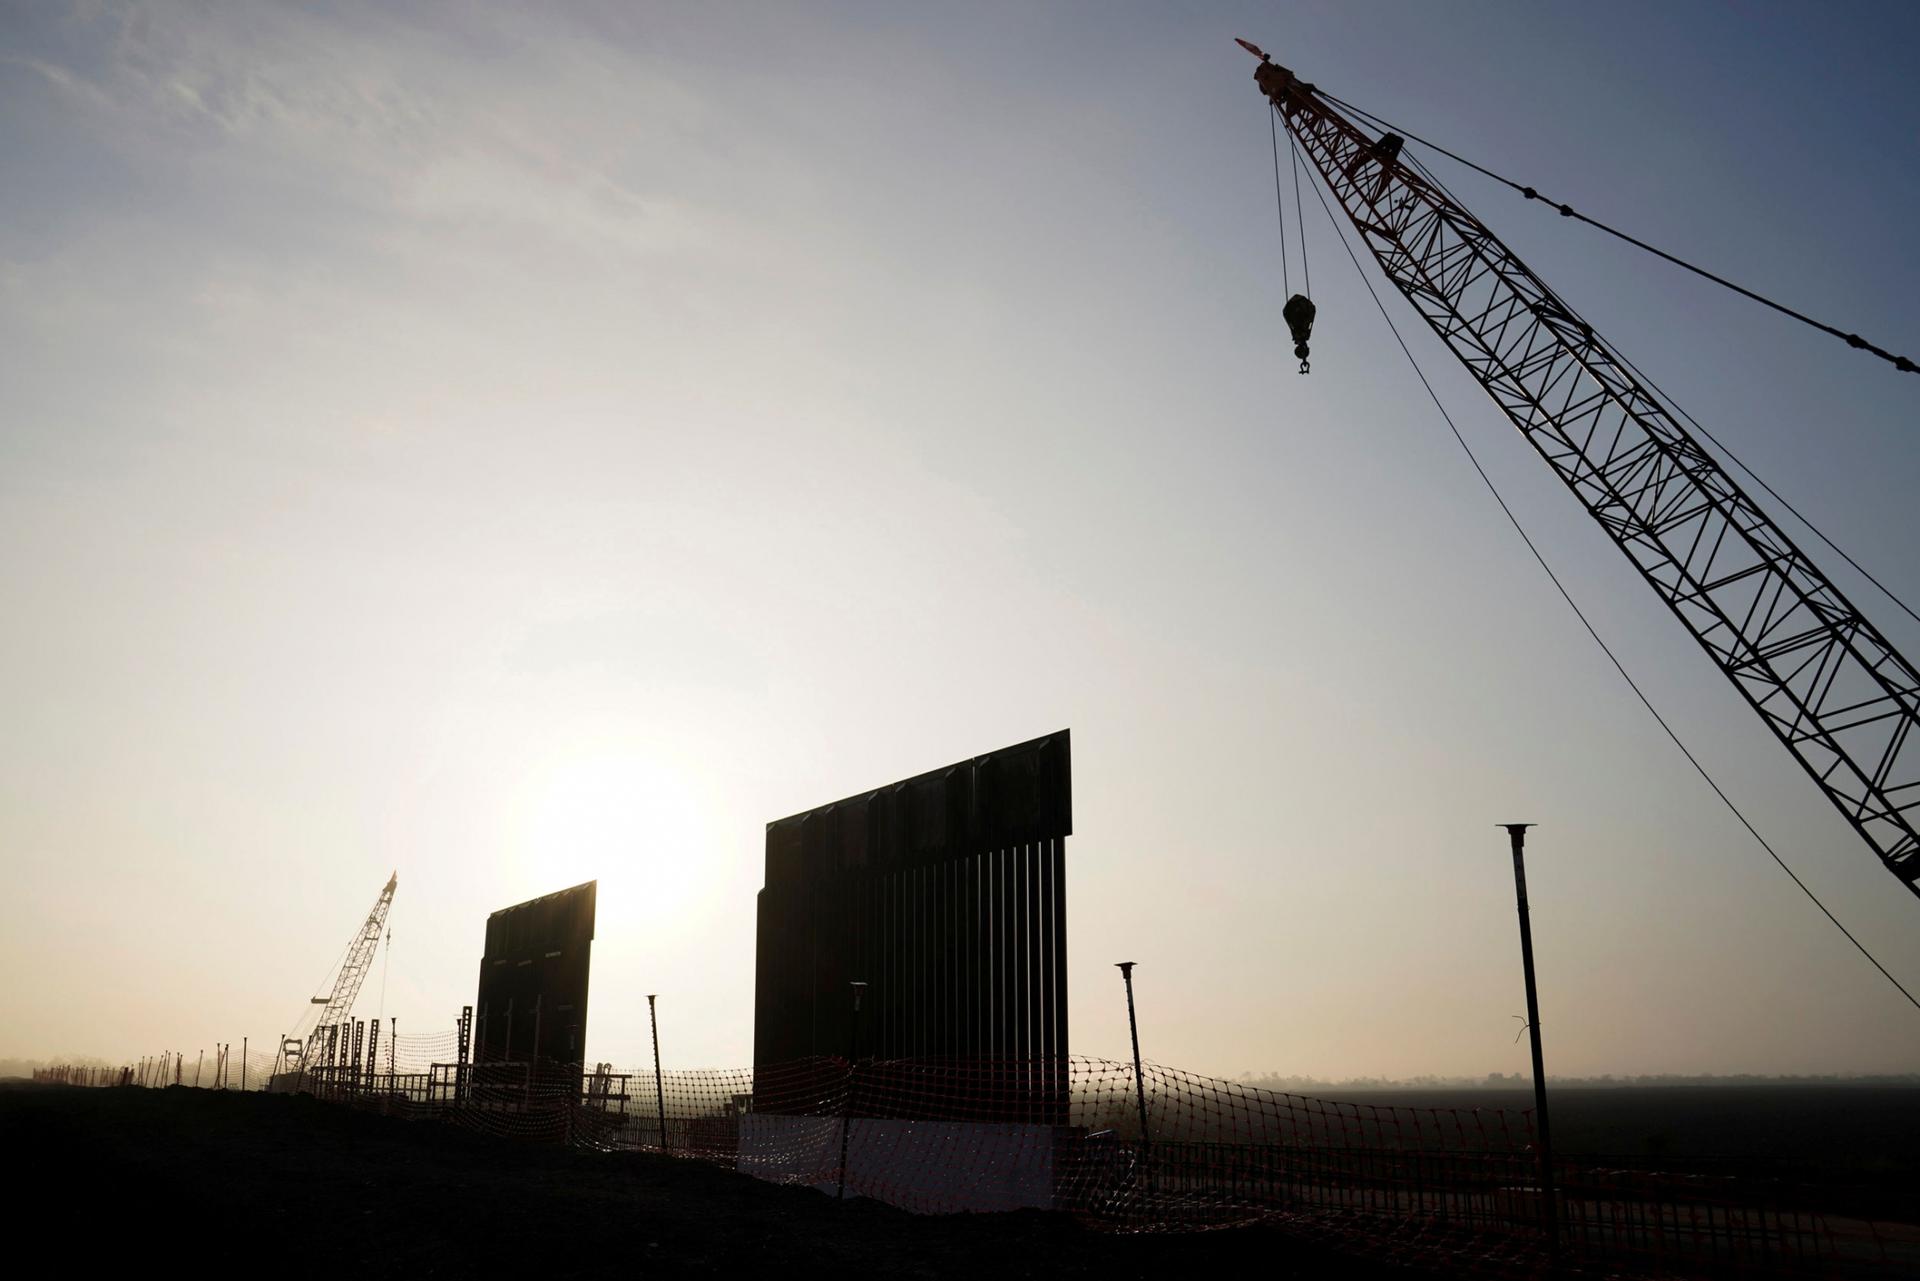 Two segments of the border wall are shown standing against a setting sun with a adjacent crane.